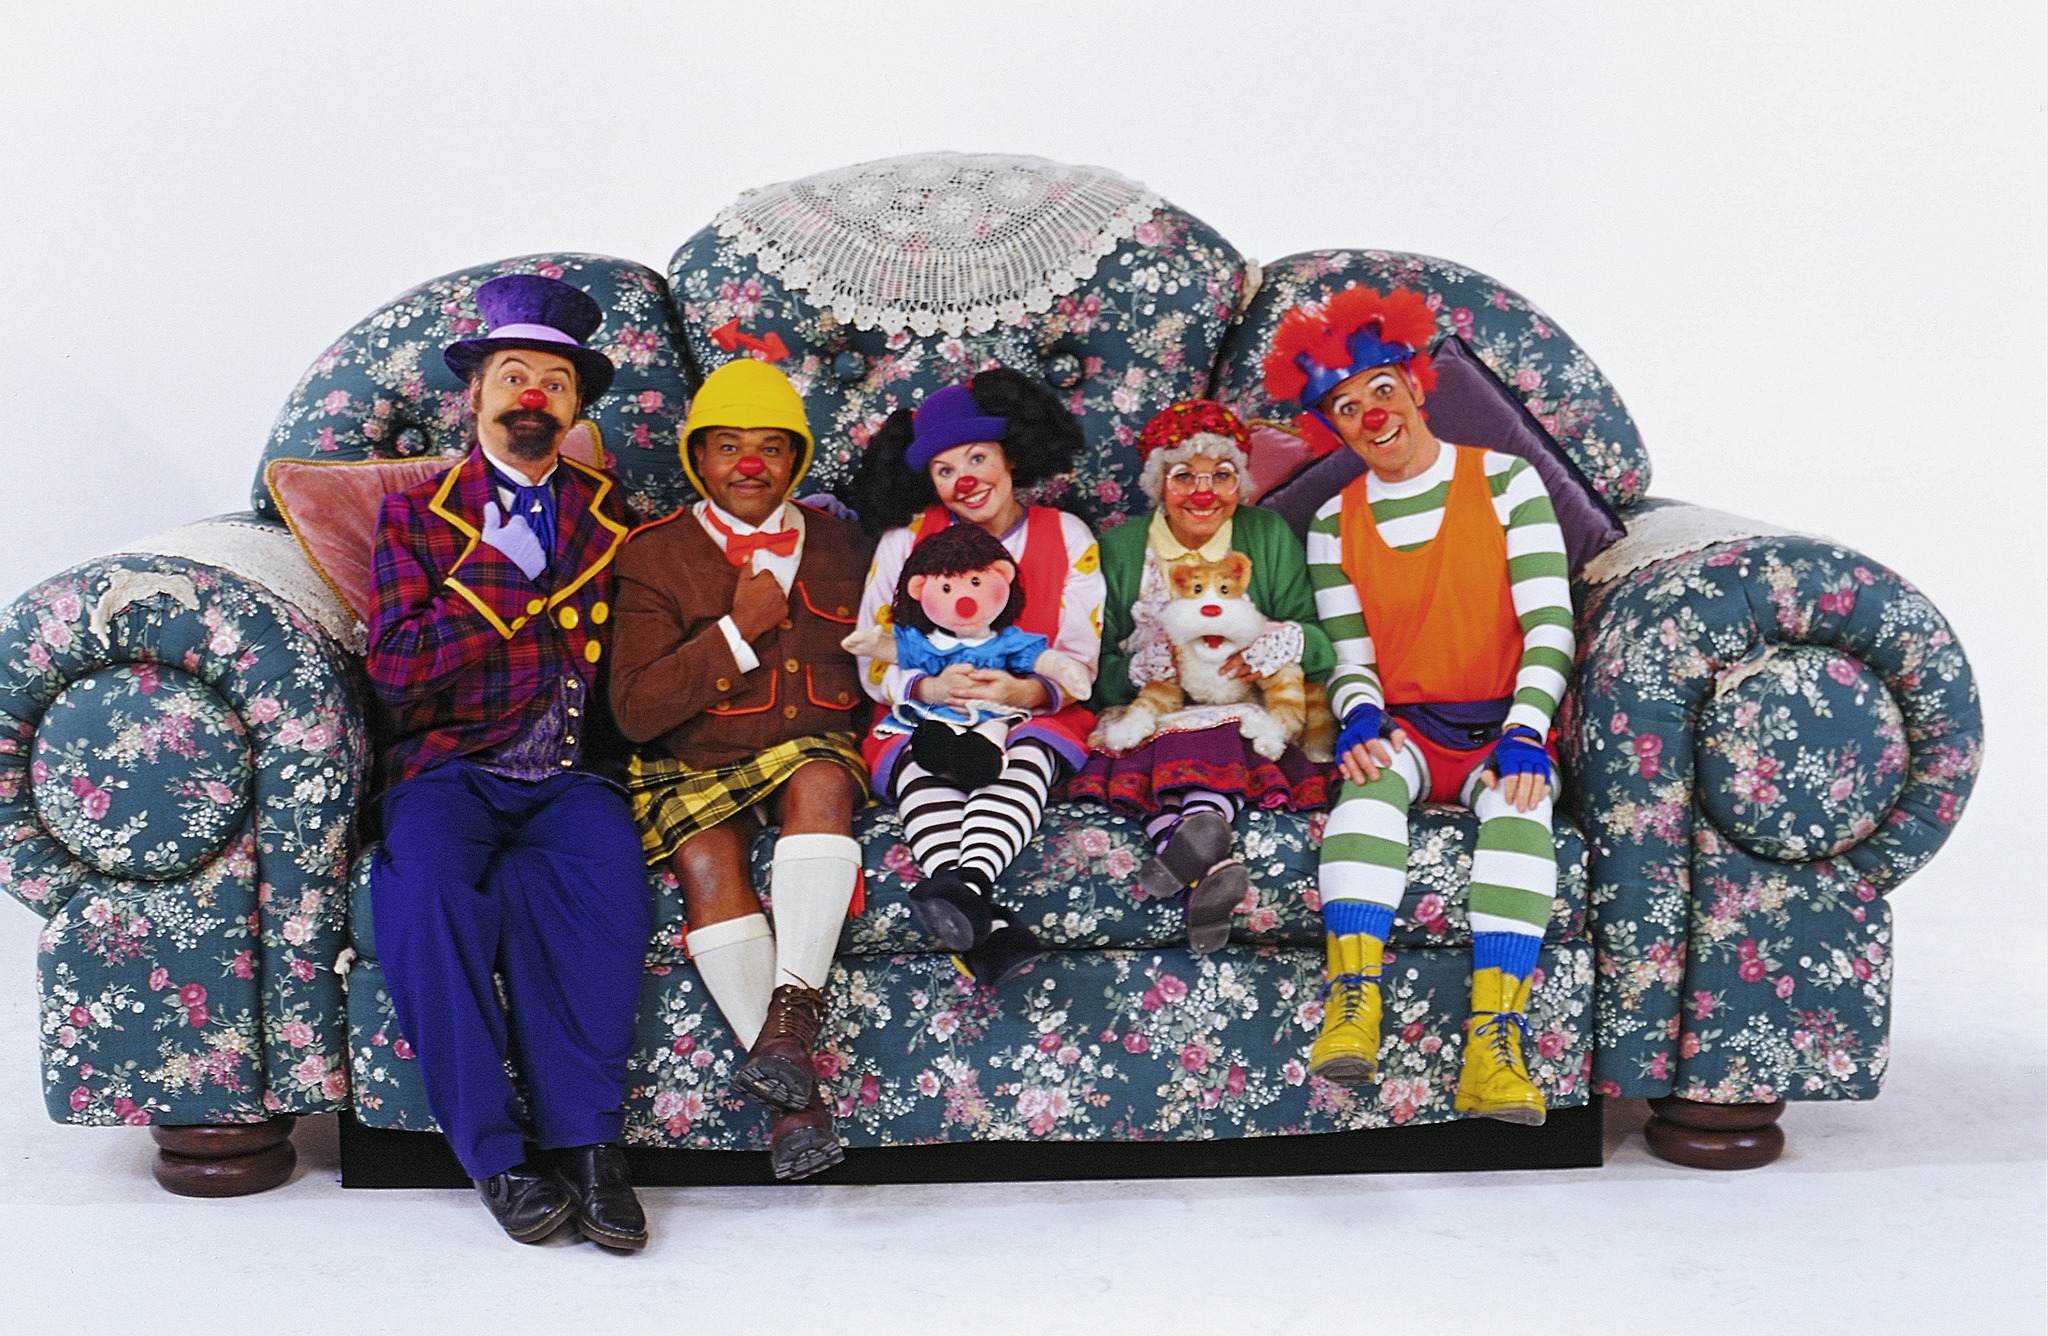 Big Comfy Couch Quotes.